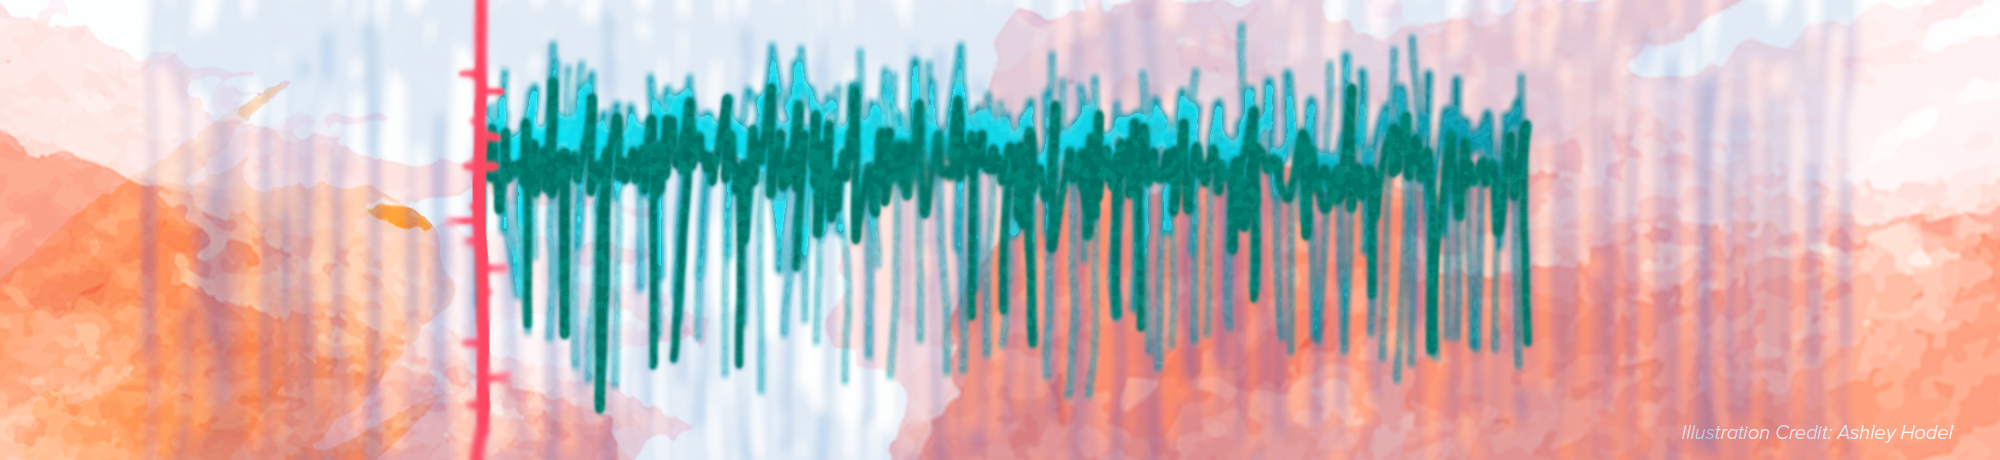 Artistic depiction of seizure activity on EEG over watercolor brush strokes